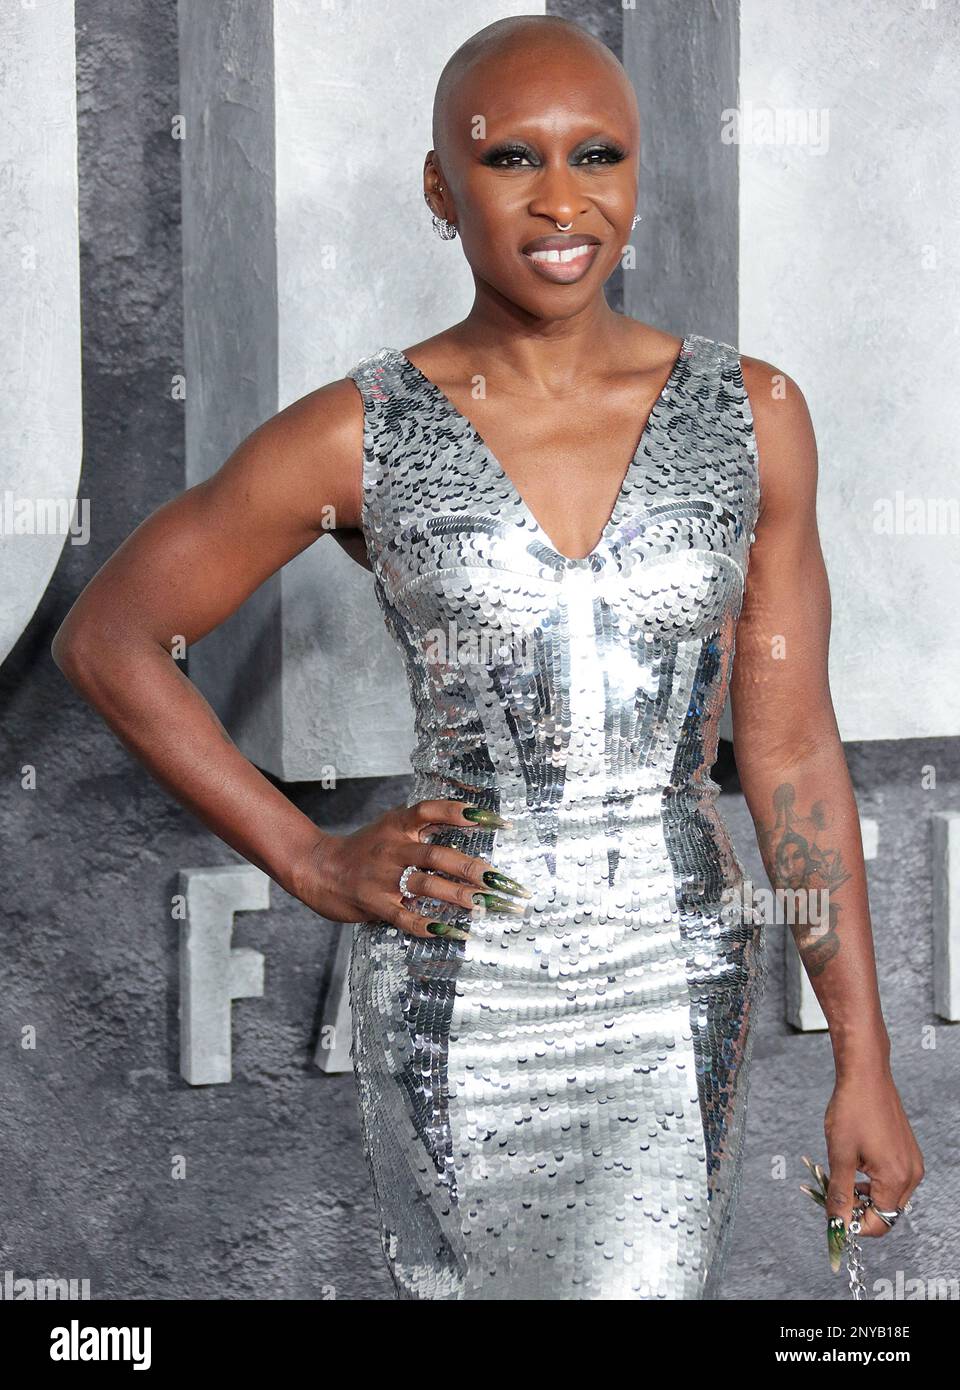 Mar 01, 2023 - London, England, UK - Cynthia Erivo attending the Global Premiere of Luther: The Fallen Sun, BFI Imax Stock Photo